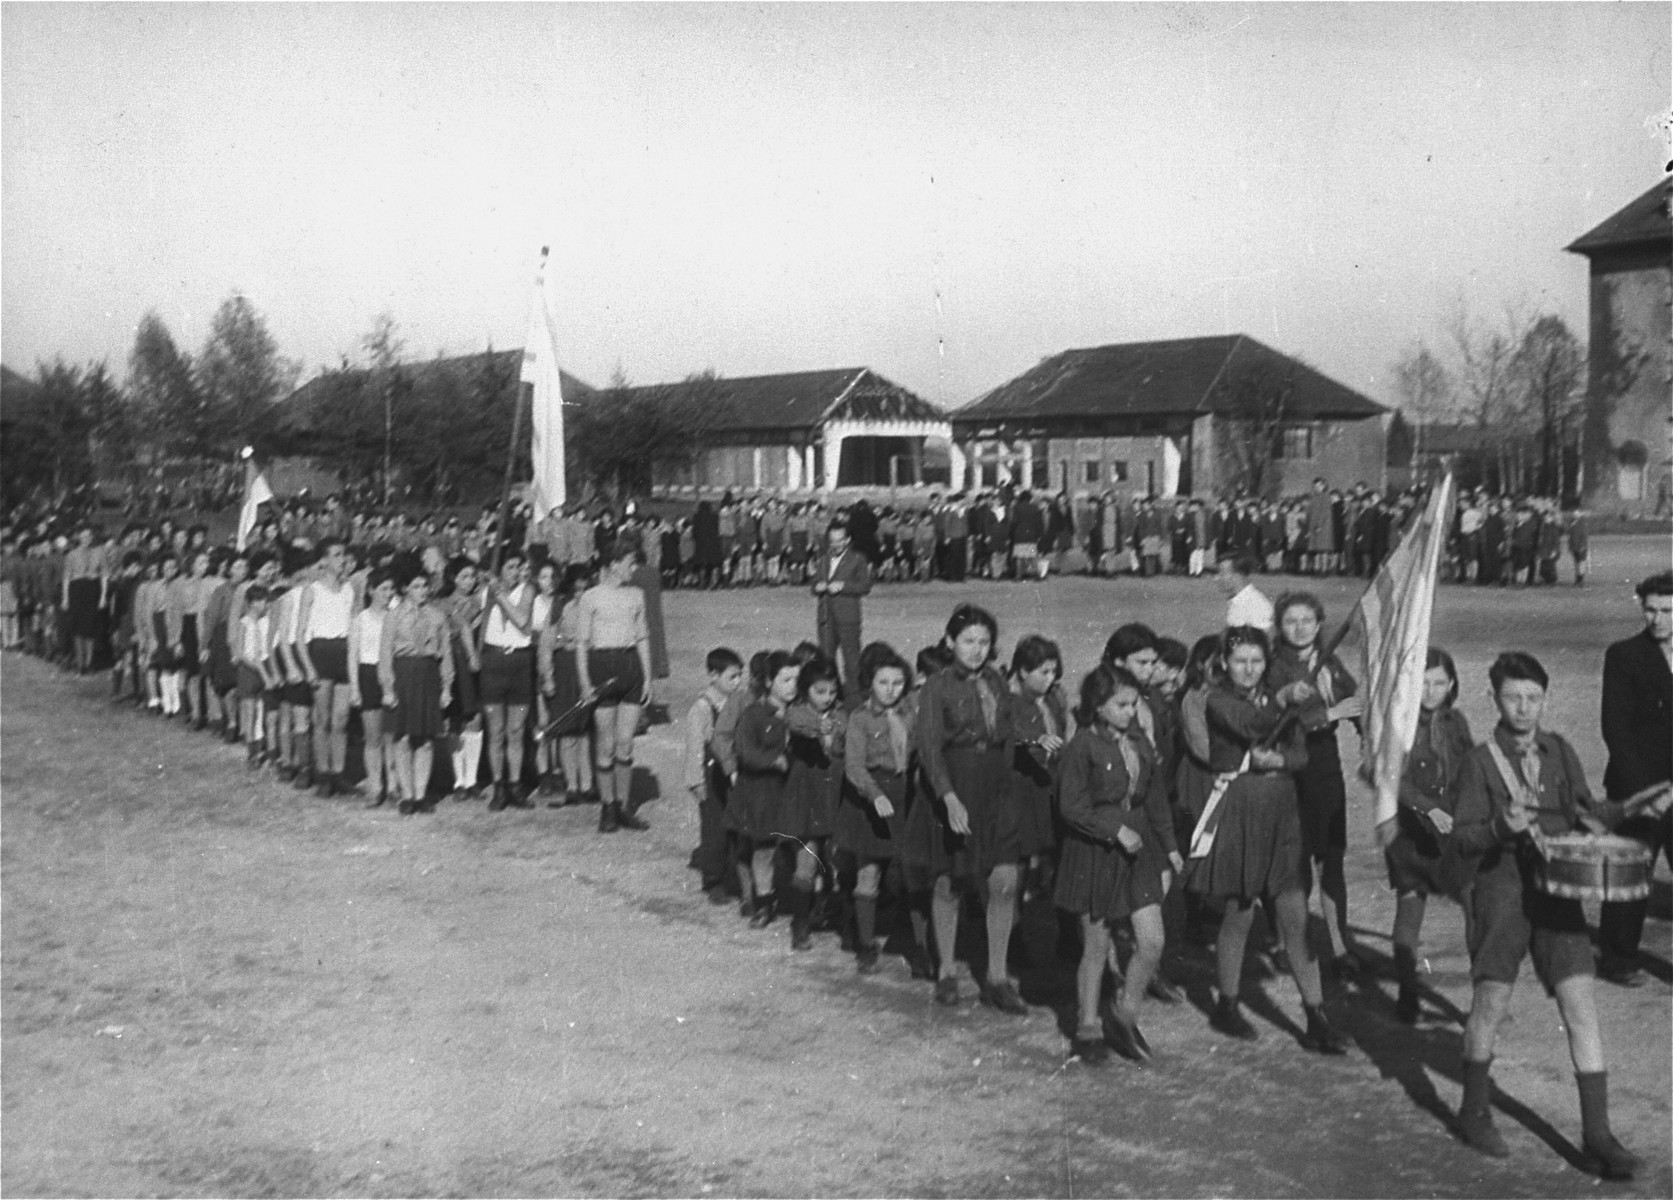 Zionist youth parade with flags around the central yard in the Landsberg displaced persons'camp.